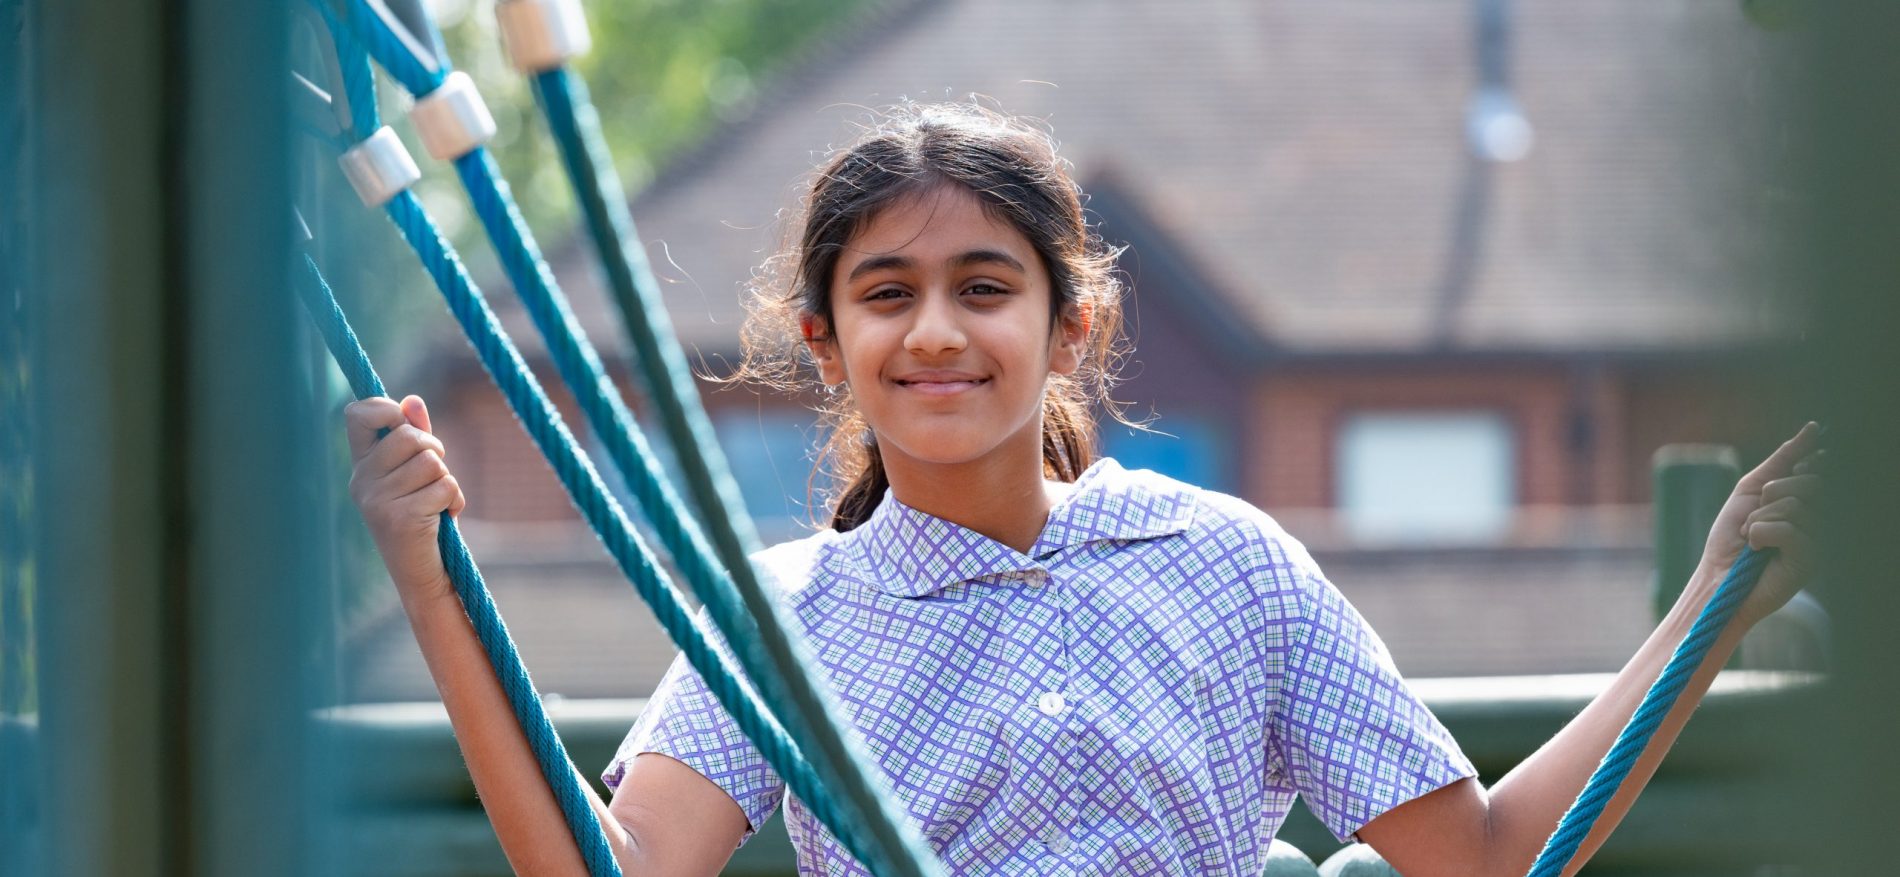 A school child on a climbing frame in the play park